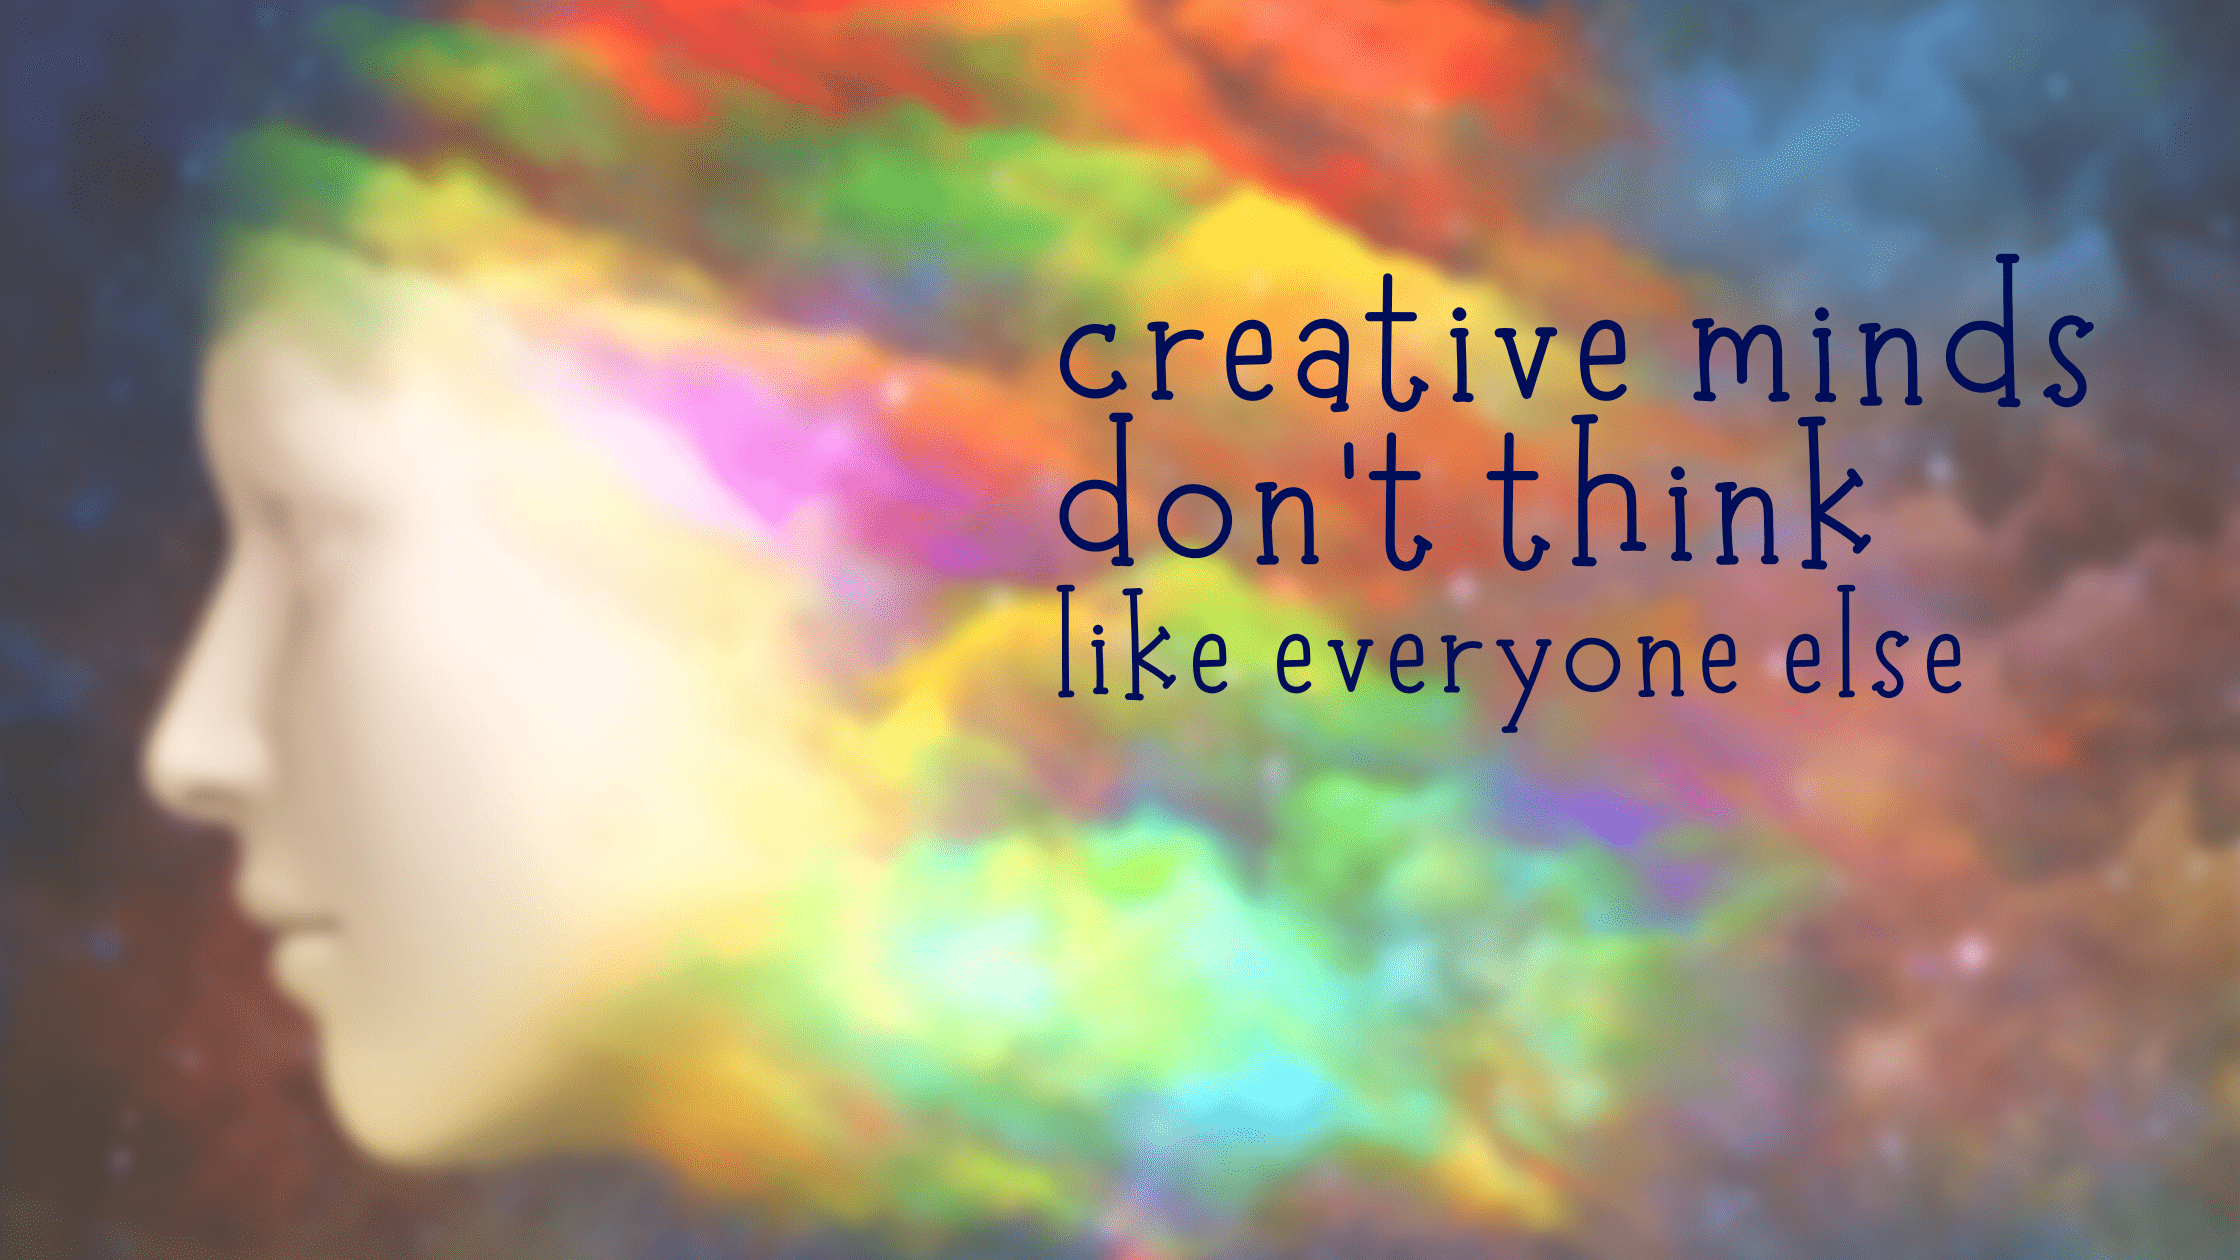 creative minds, creative mind, creative thought, creative think, divergent thinking